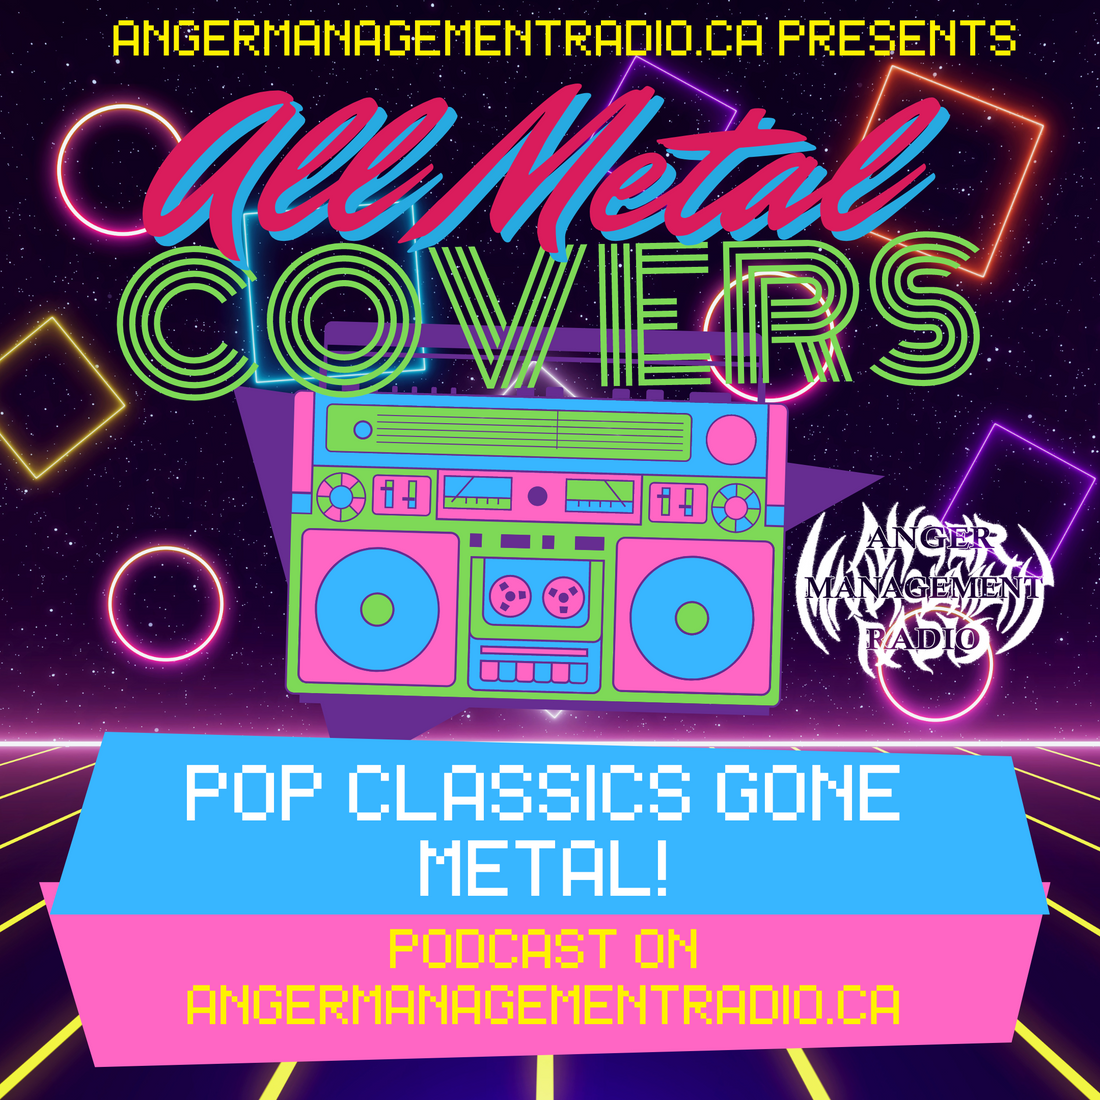 Anger Management Radio Presents: ALL METAL COVERS! Pop Classics Gone Metal! The image shows a retro boombox and a neon 80's style background.